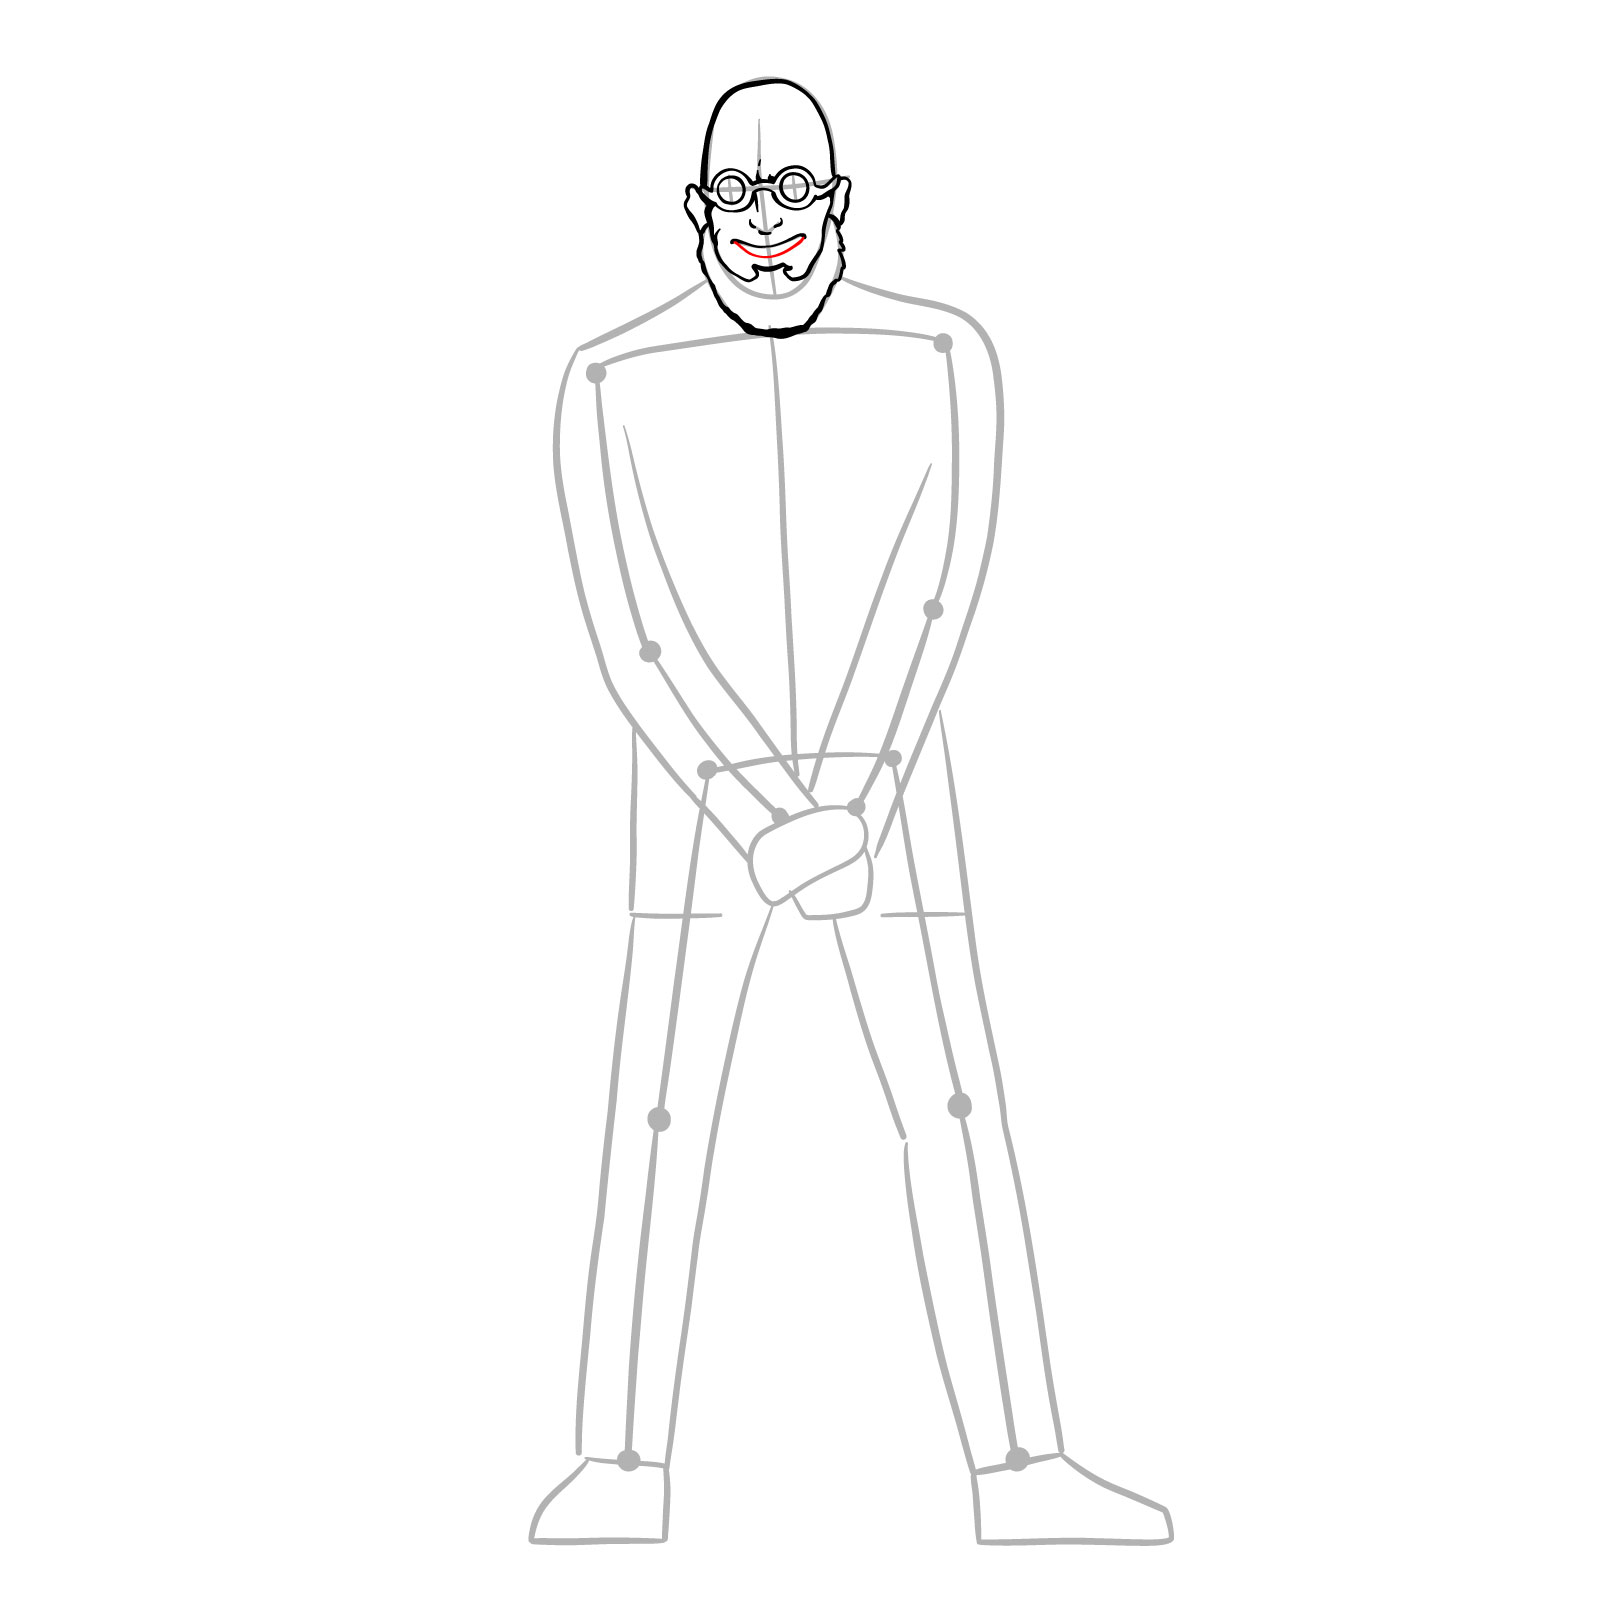 How to draw Dr. Hugo Strange from DC Comics - step 12